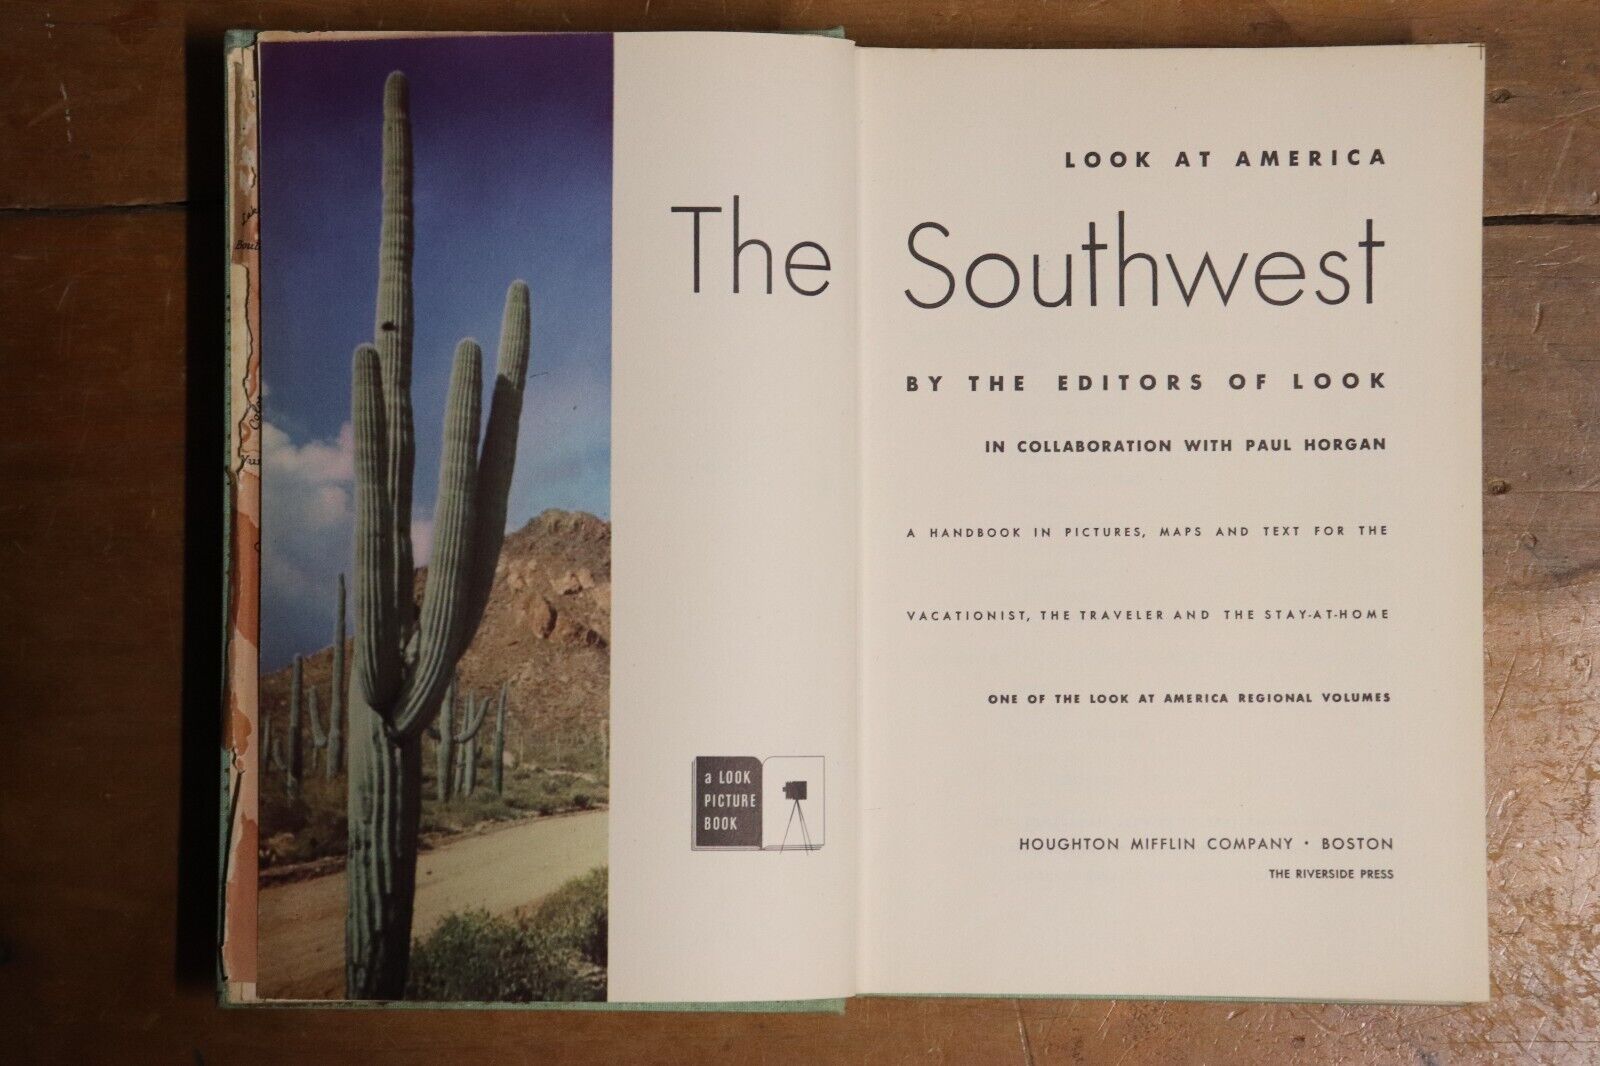 Look at America: The Southwest - 1947 - 1st Edition Vintage Book